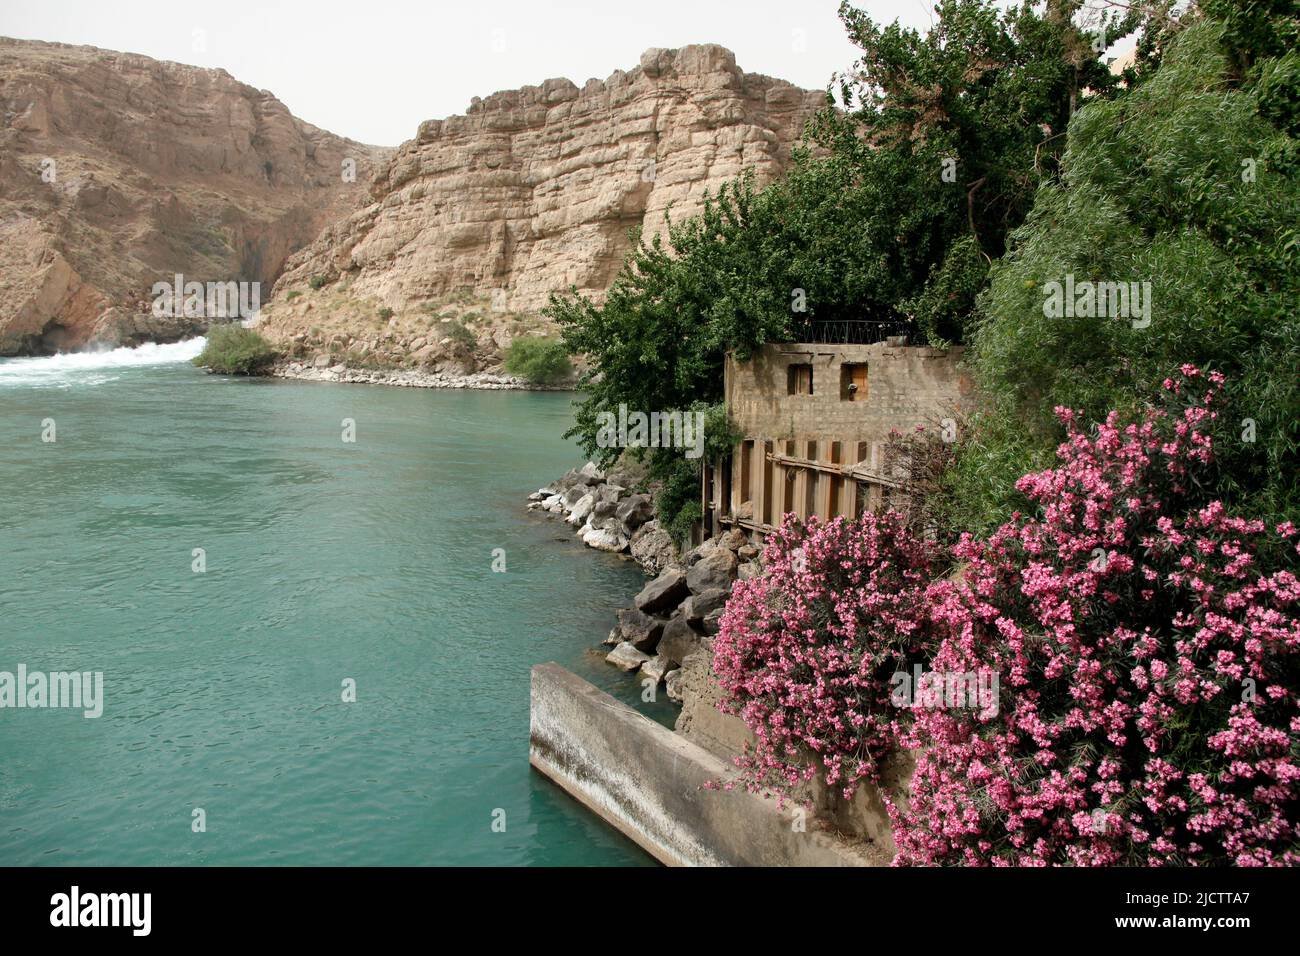 Wild flowers bloom at the Kajaki Dam in Kajaki, Helmand province, Afghanistan May 24, 2012. The dam powers thousands of homes and businesses in the en Stock Photo